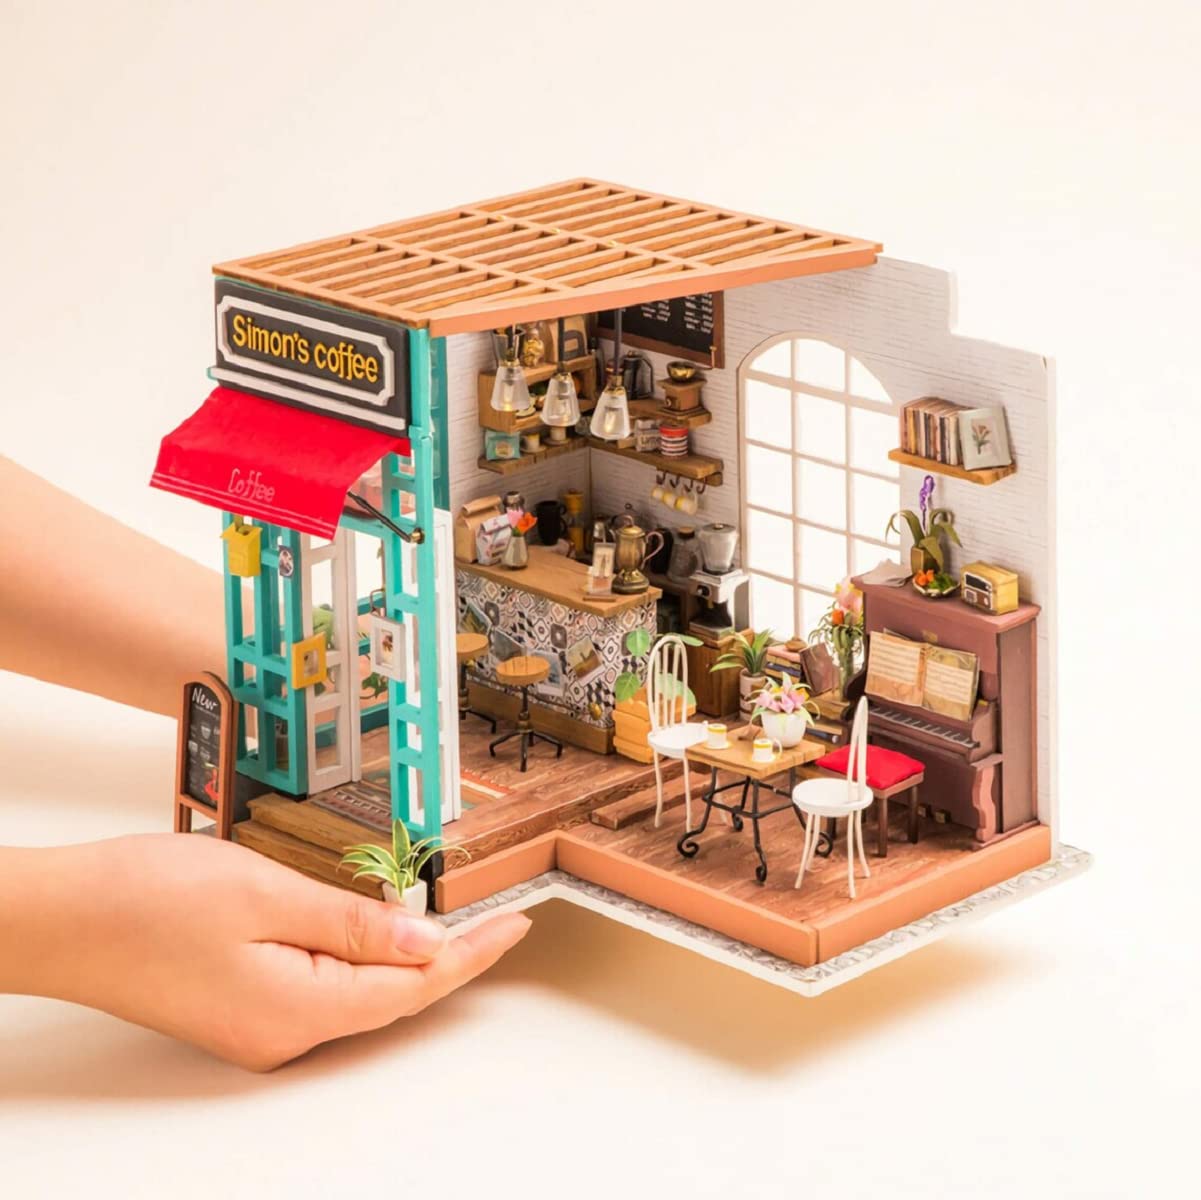 Rolife DIY Miniature House Kits, Tiny Model House for Adults to Build, Mayberry Street Miniature Model Kit with LED Light, DIY Crafts/Birthday Gift/Home Decor for Family and Friend(Simon's Cafe Shop)